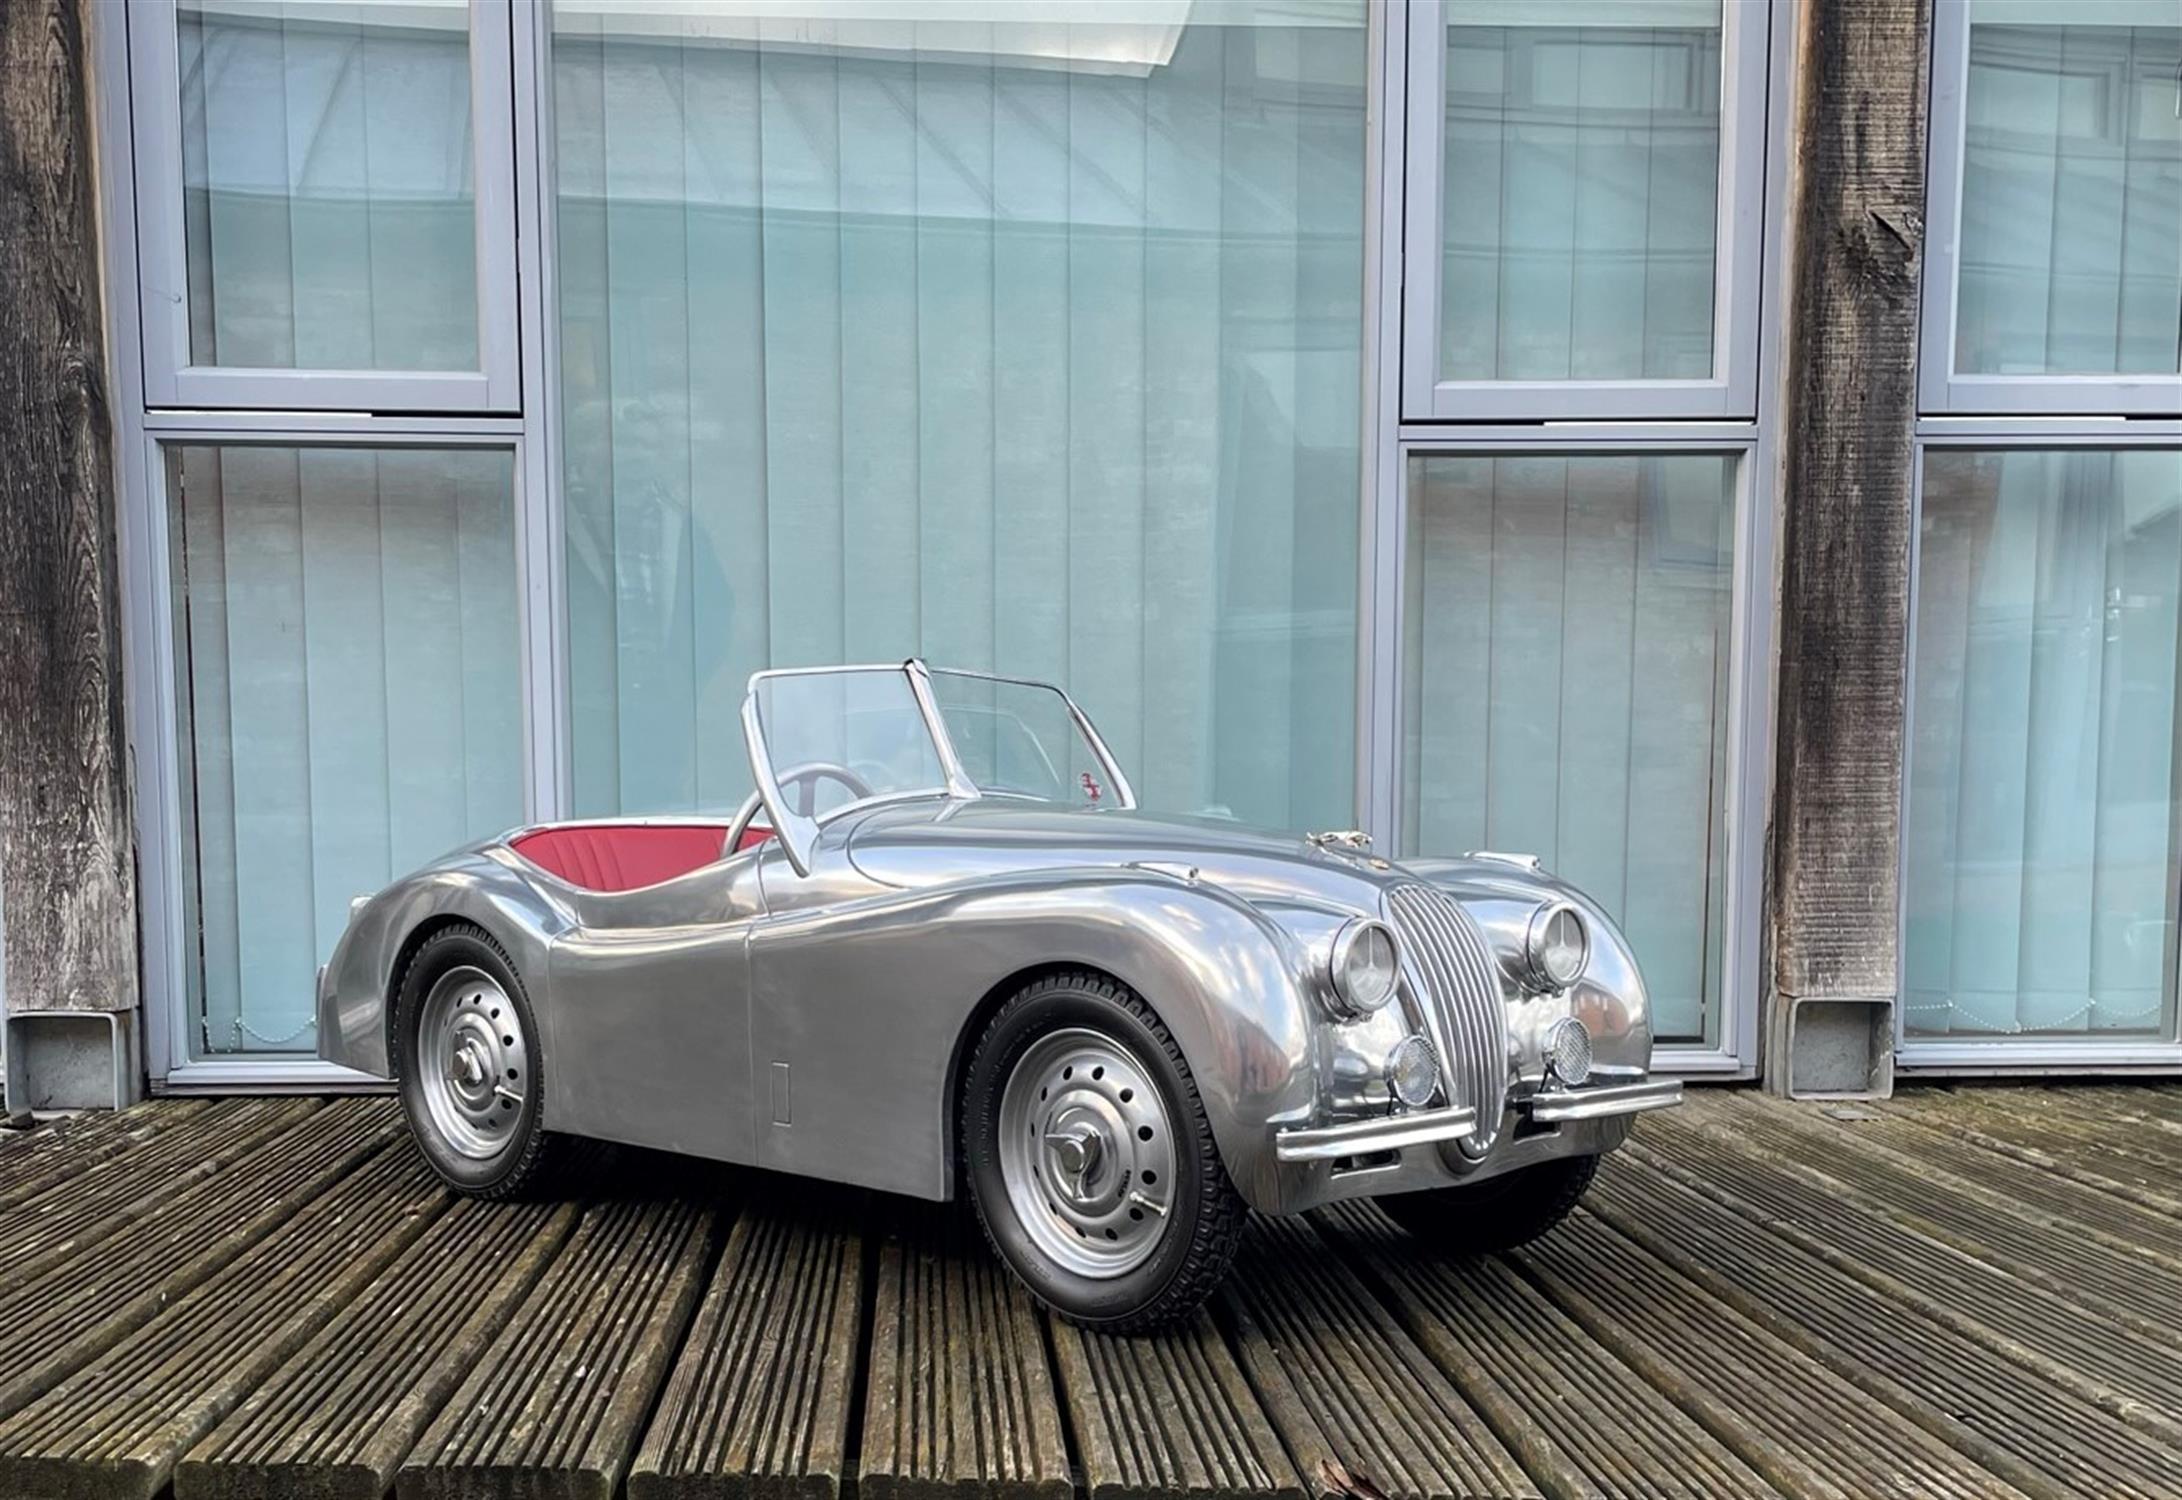 A Unique Polished Aluminium Bodied 1:2.5 Scale Electric XK120 - Image 5 of 10